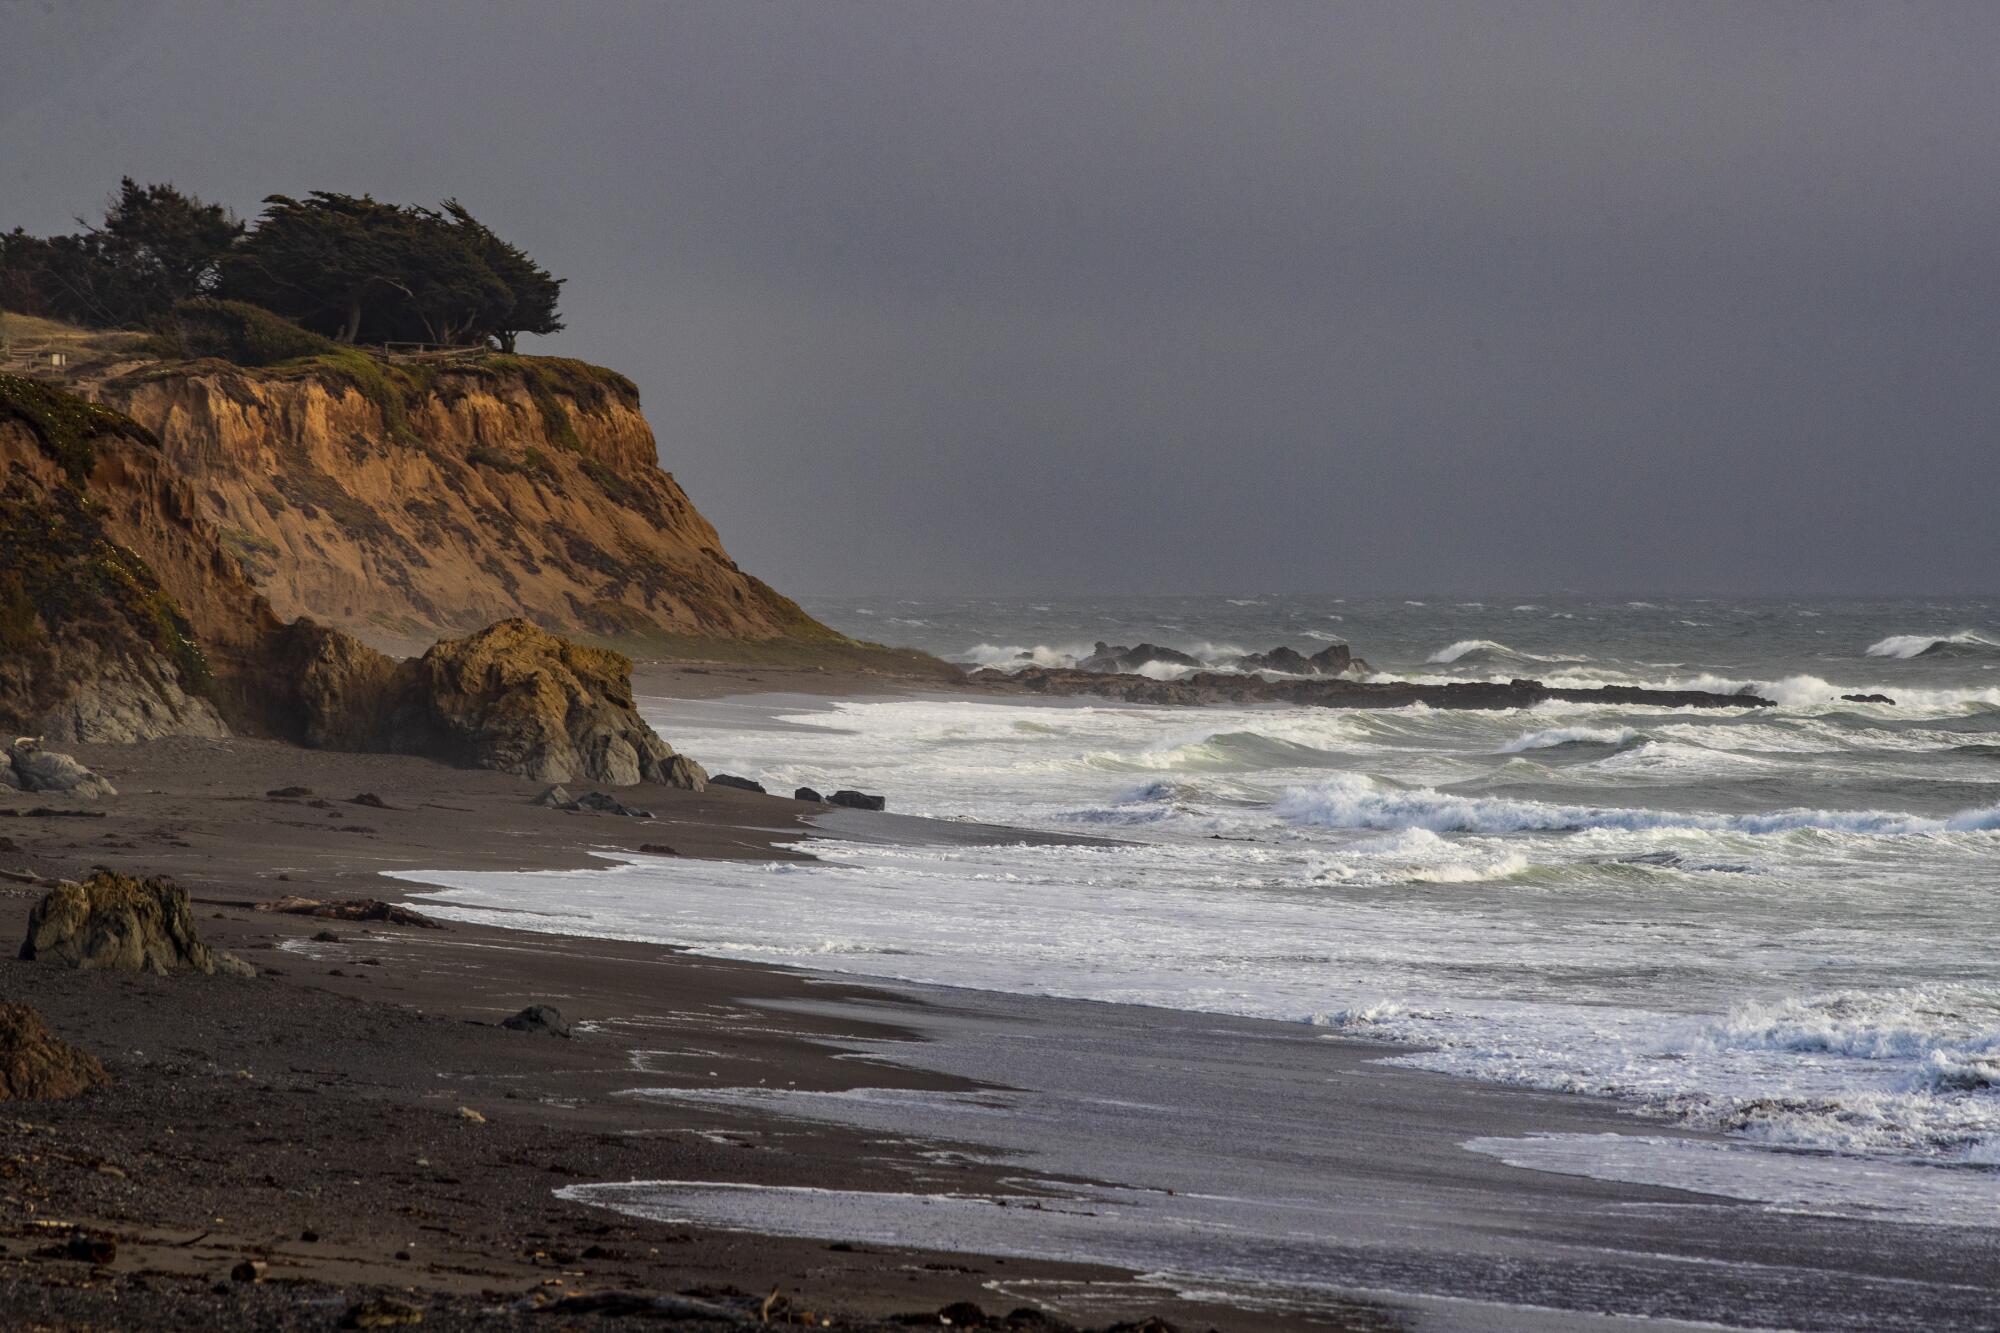 Trees are seen on a bluff as waves wash up on an empty beach.